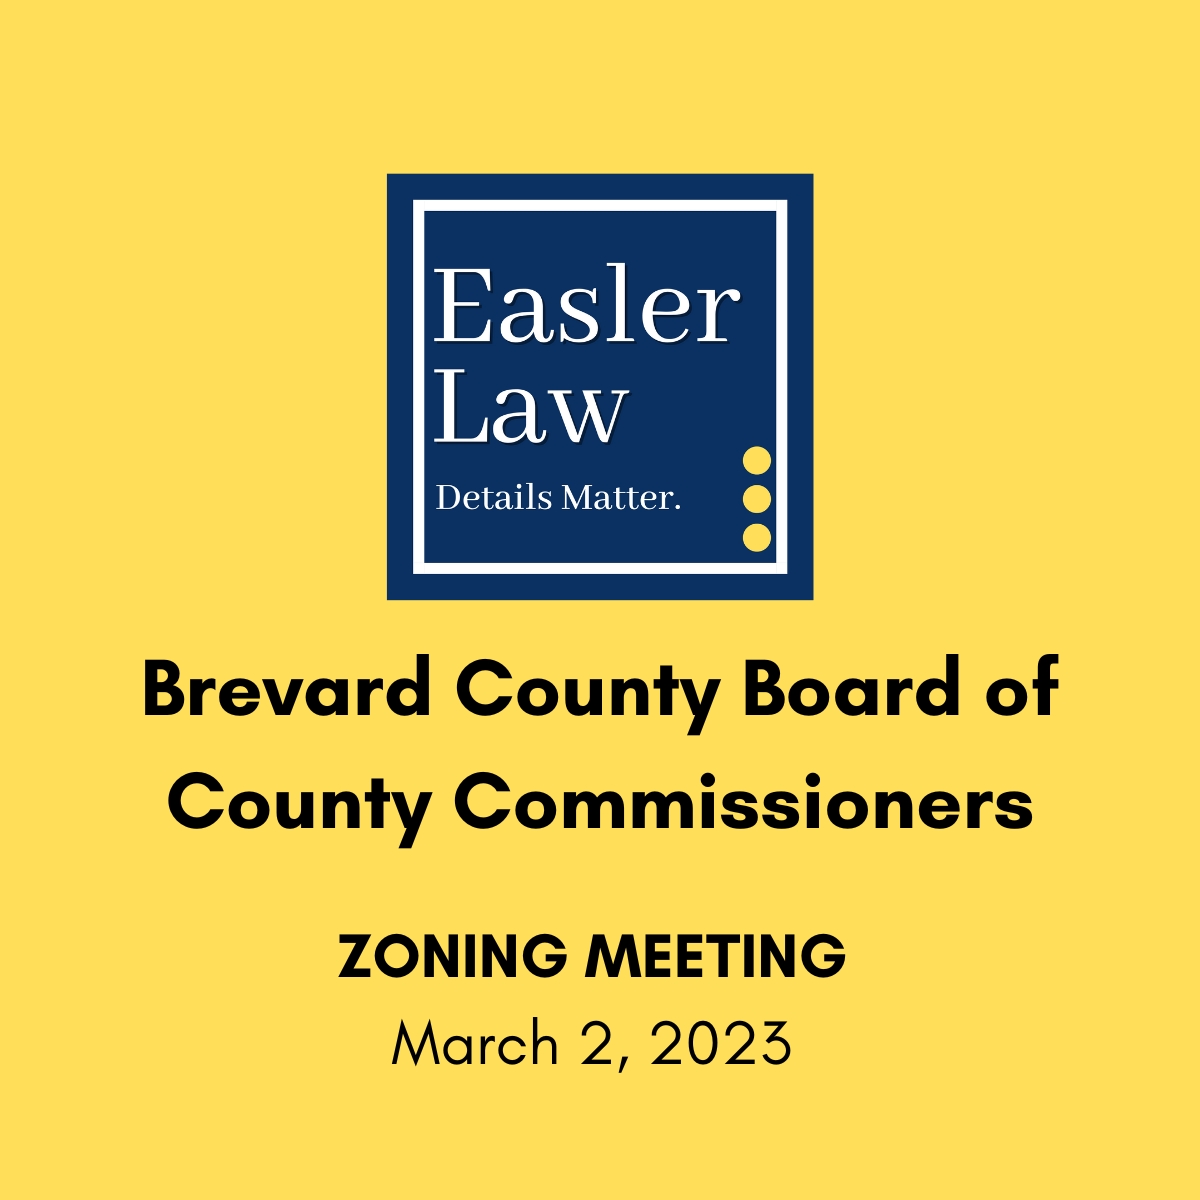 Key Decisions and Public Input at the Brevard County Zoning Meeting on March 2, 2023